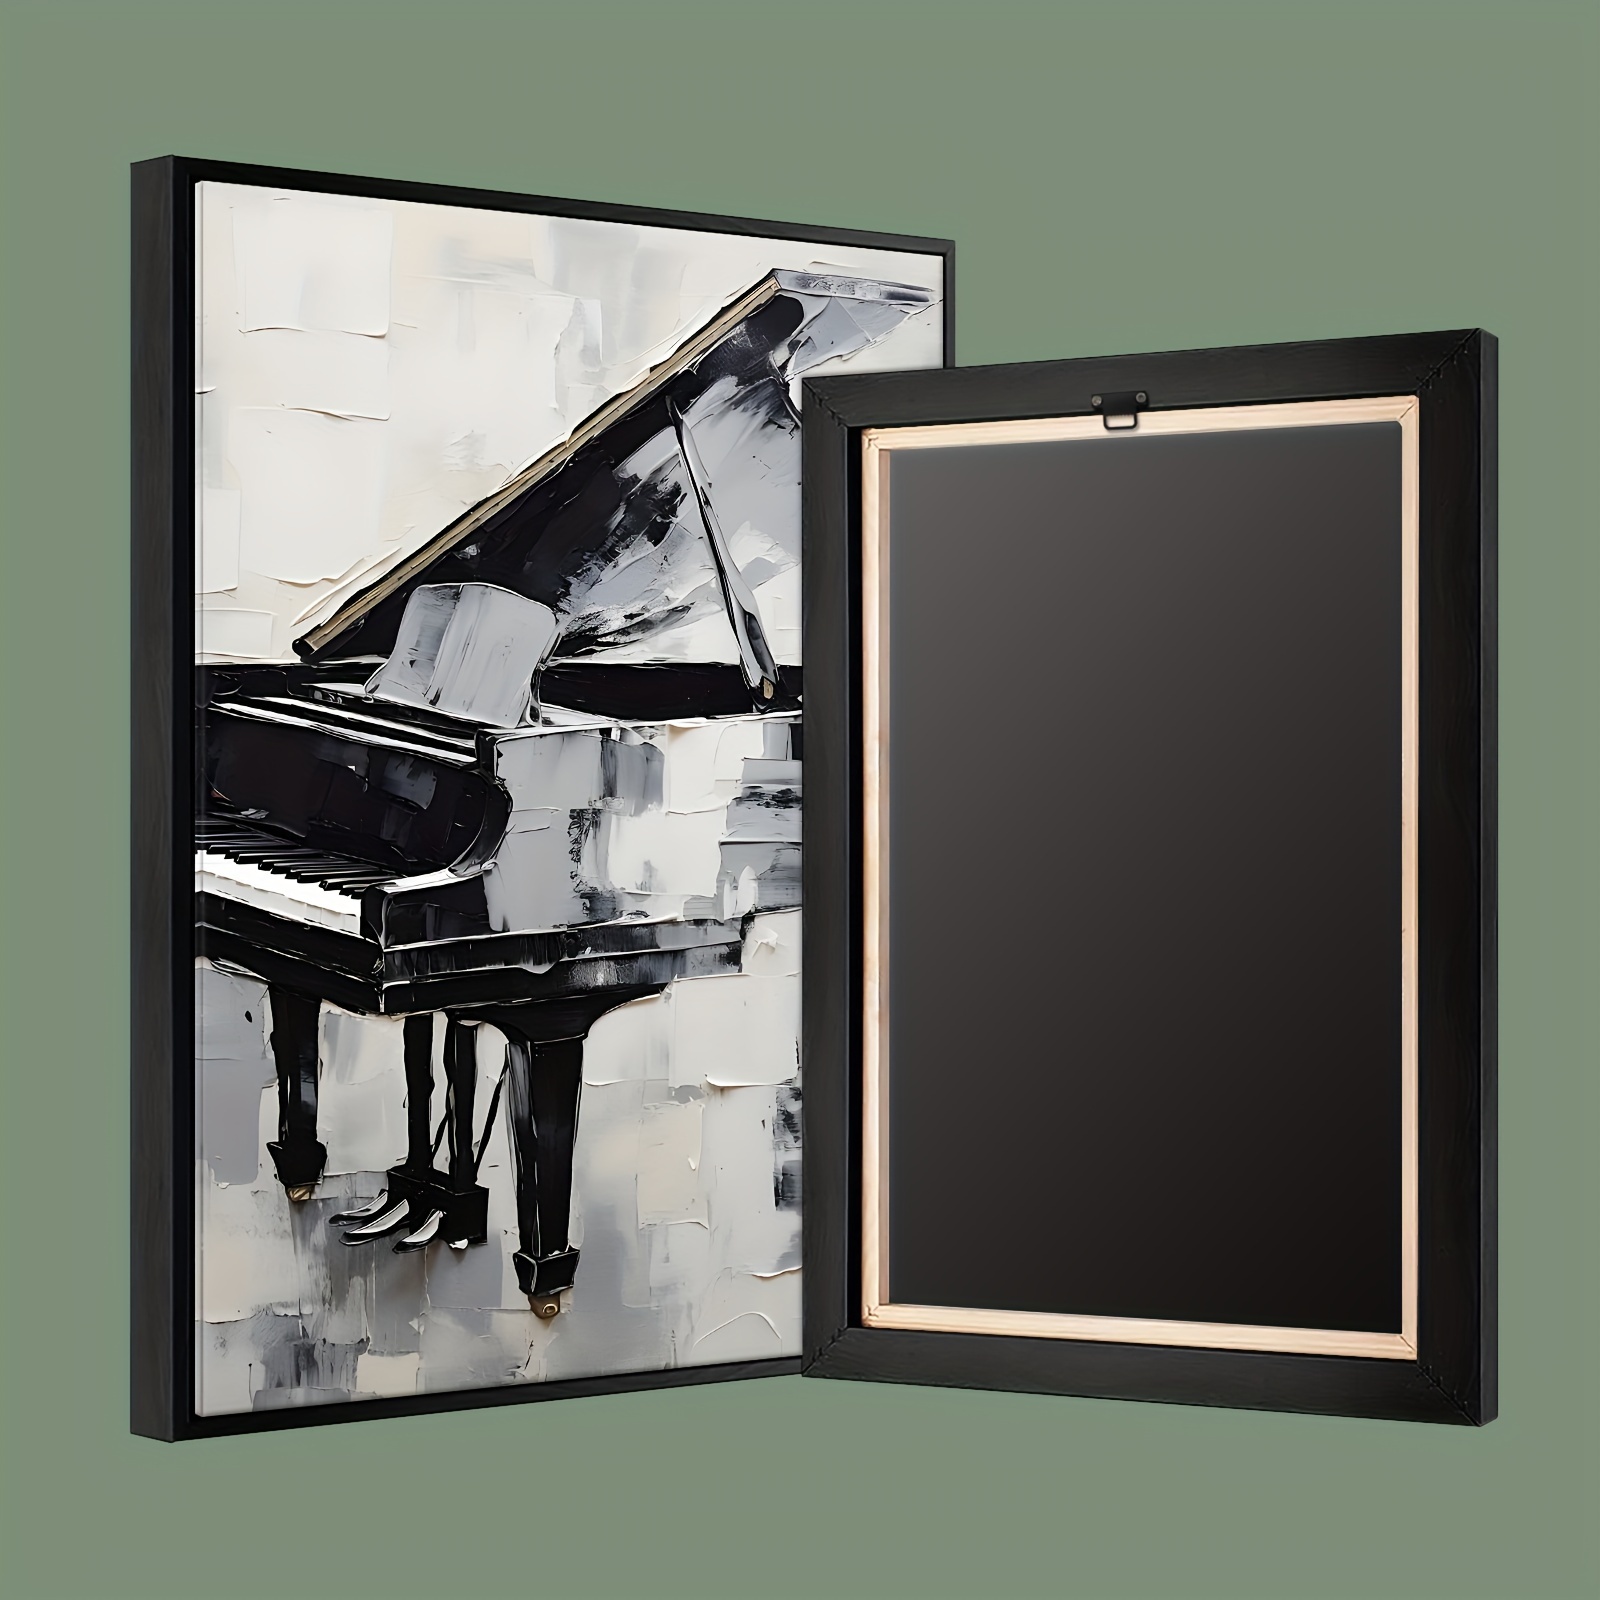 

1pc Wooden Framed Canvas Poster, Retro Art, Vintage Piano Canvas Wall Art, Ideal Gift For Bedroom Living Room Corridor, Wall Art, Wall Decor, Winter Decor, Wall Decor, Room Decoration